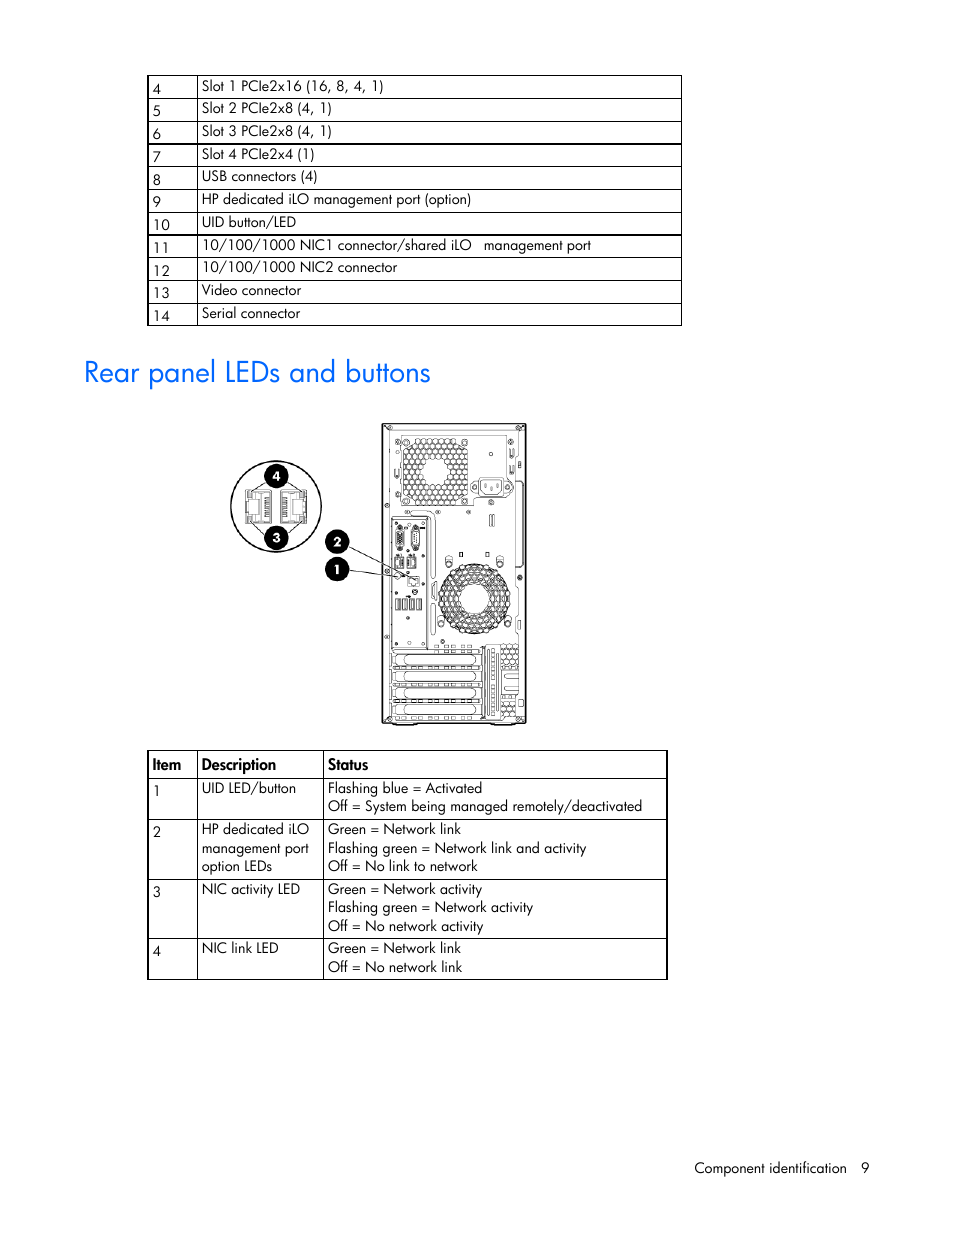 Rear panel leds and buttons | HP ProLiant ML110 G7 Server User Manual |  Page 9 / 113